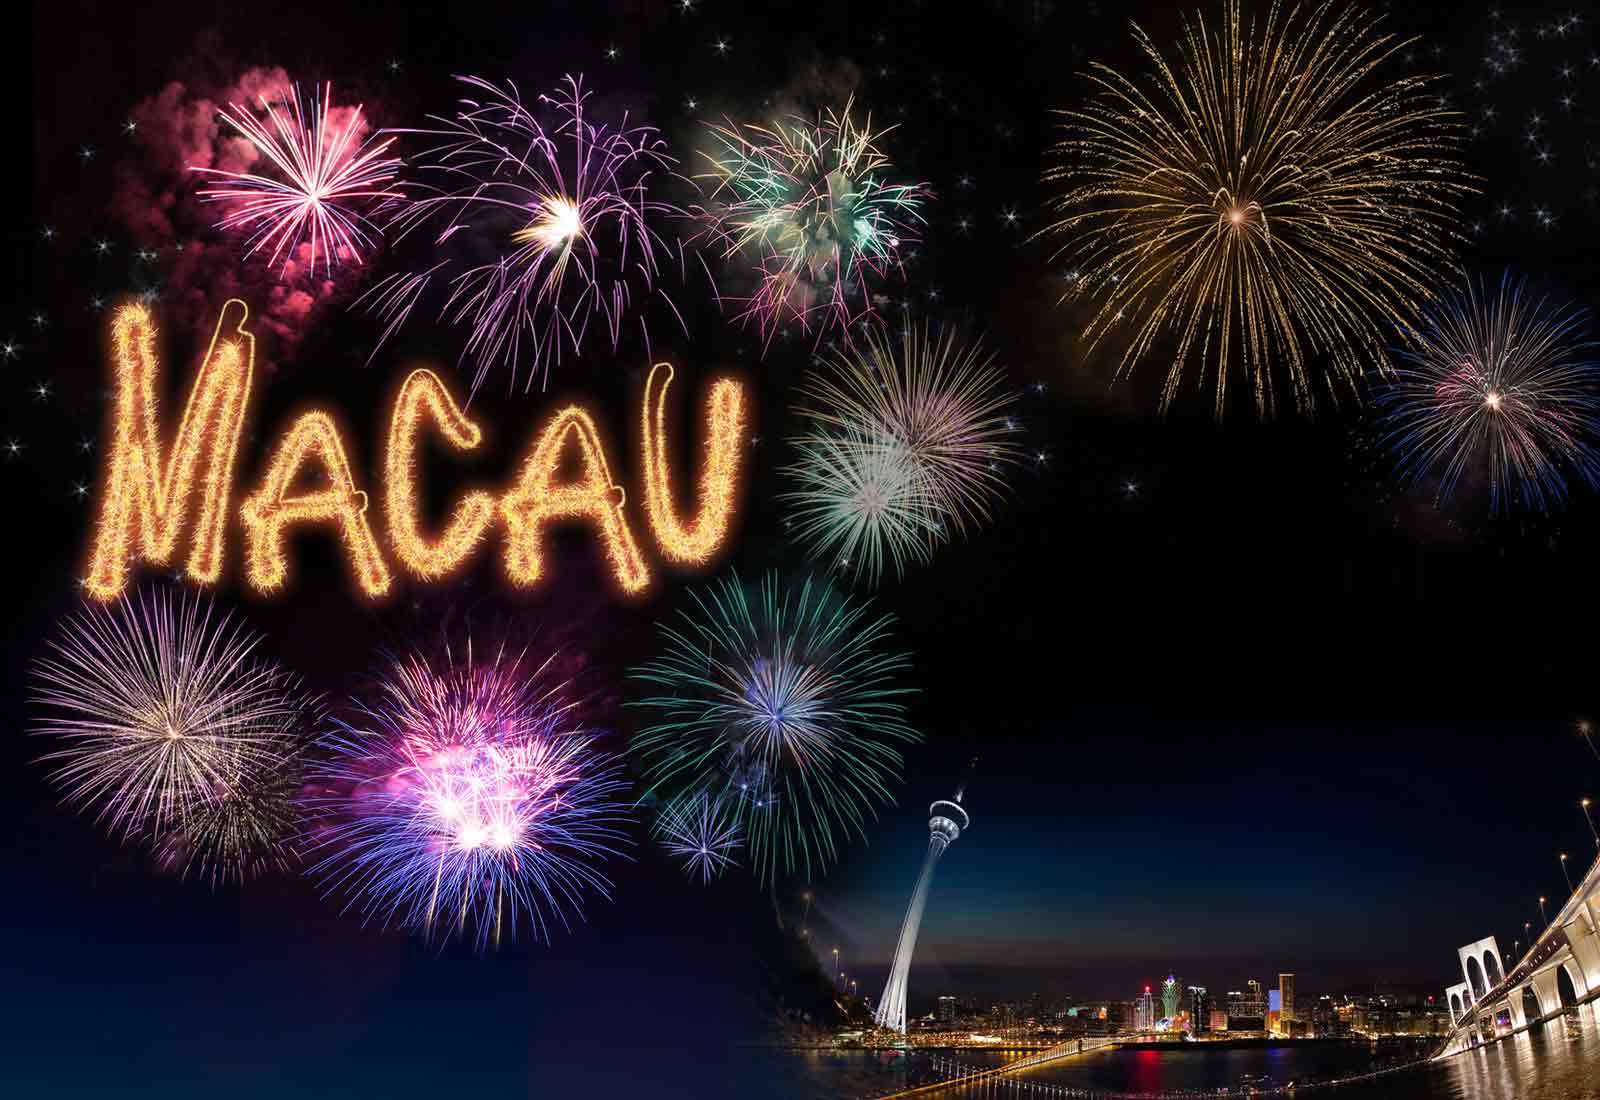 28th Macao International Fireworks Display Contest